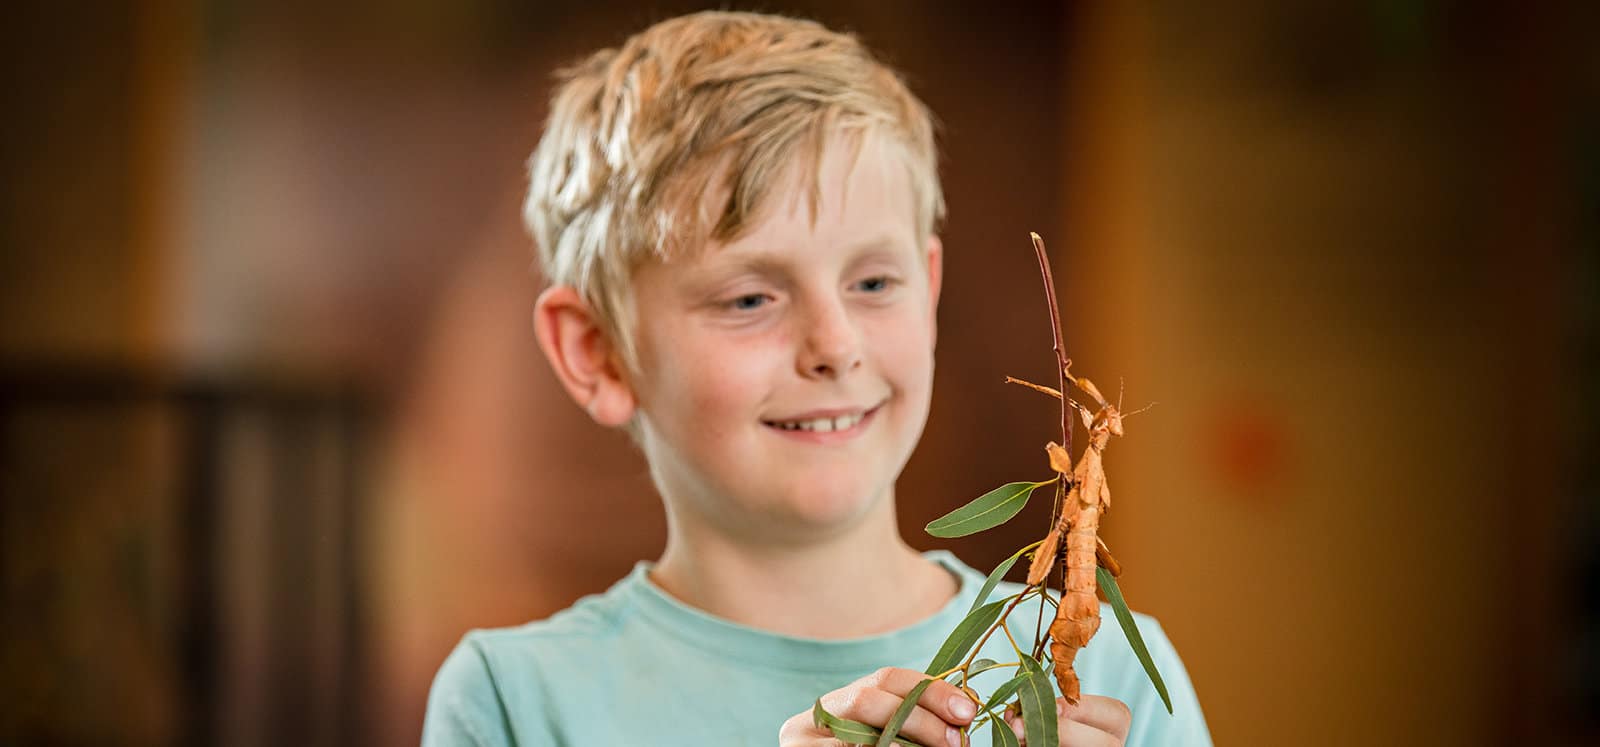 Boy inspecting a stick insect